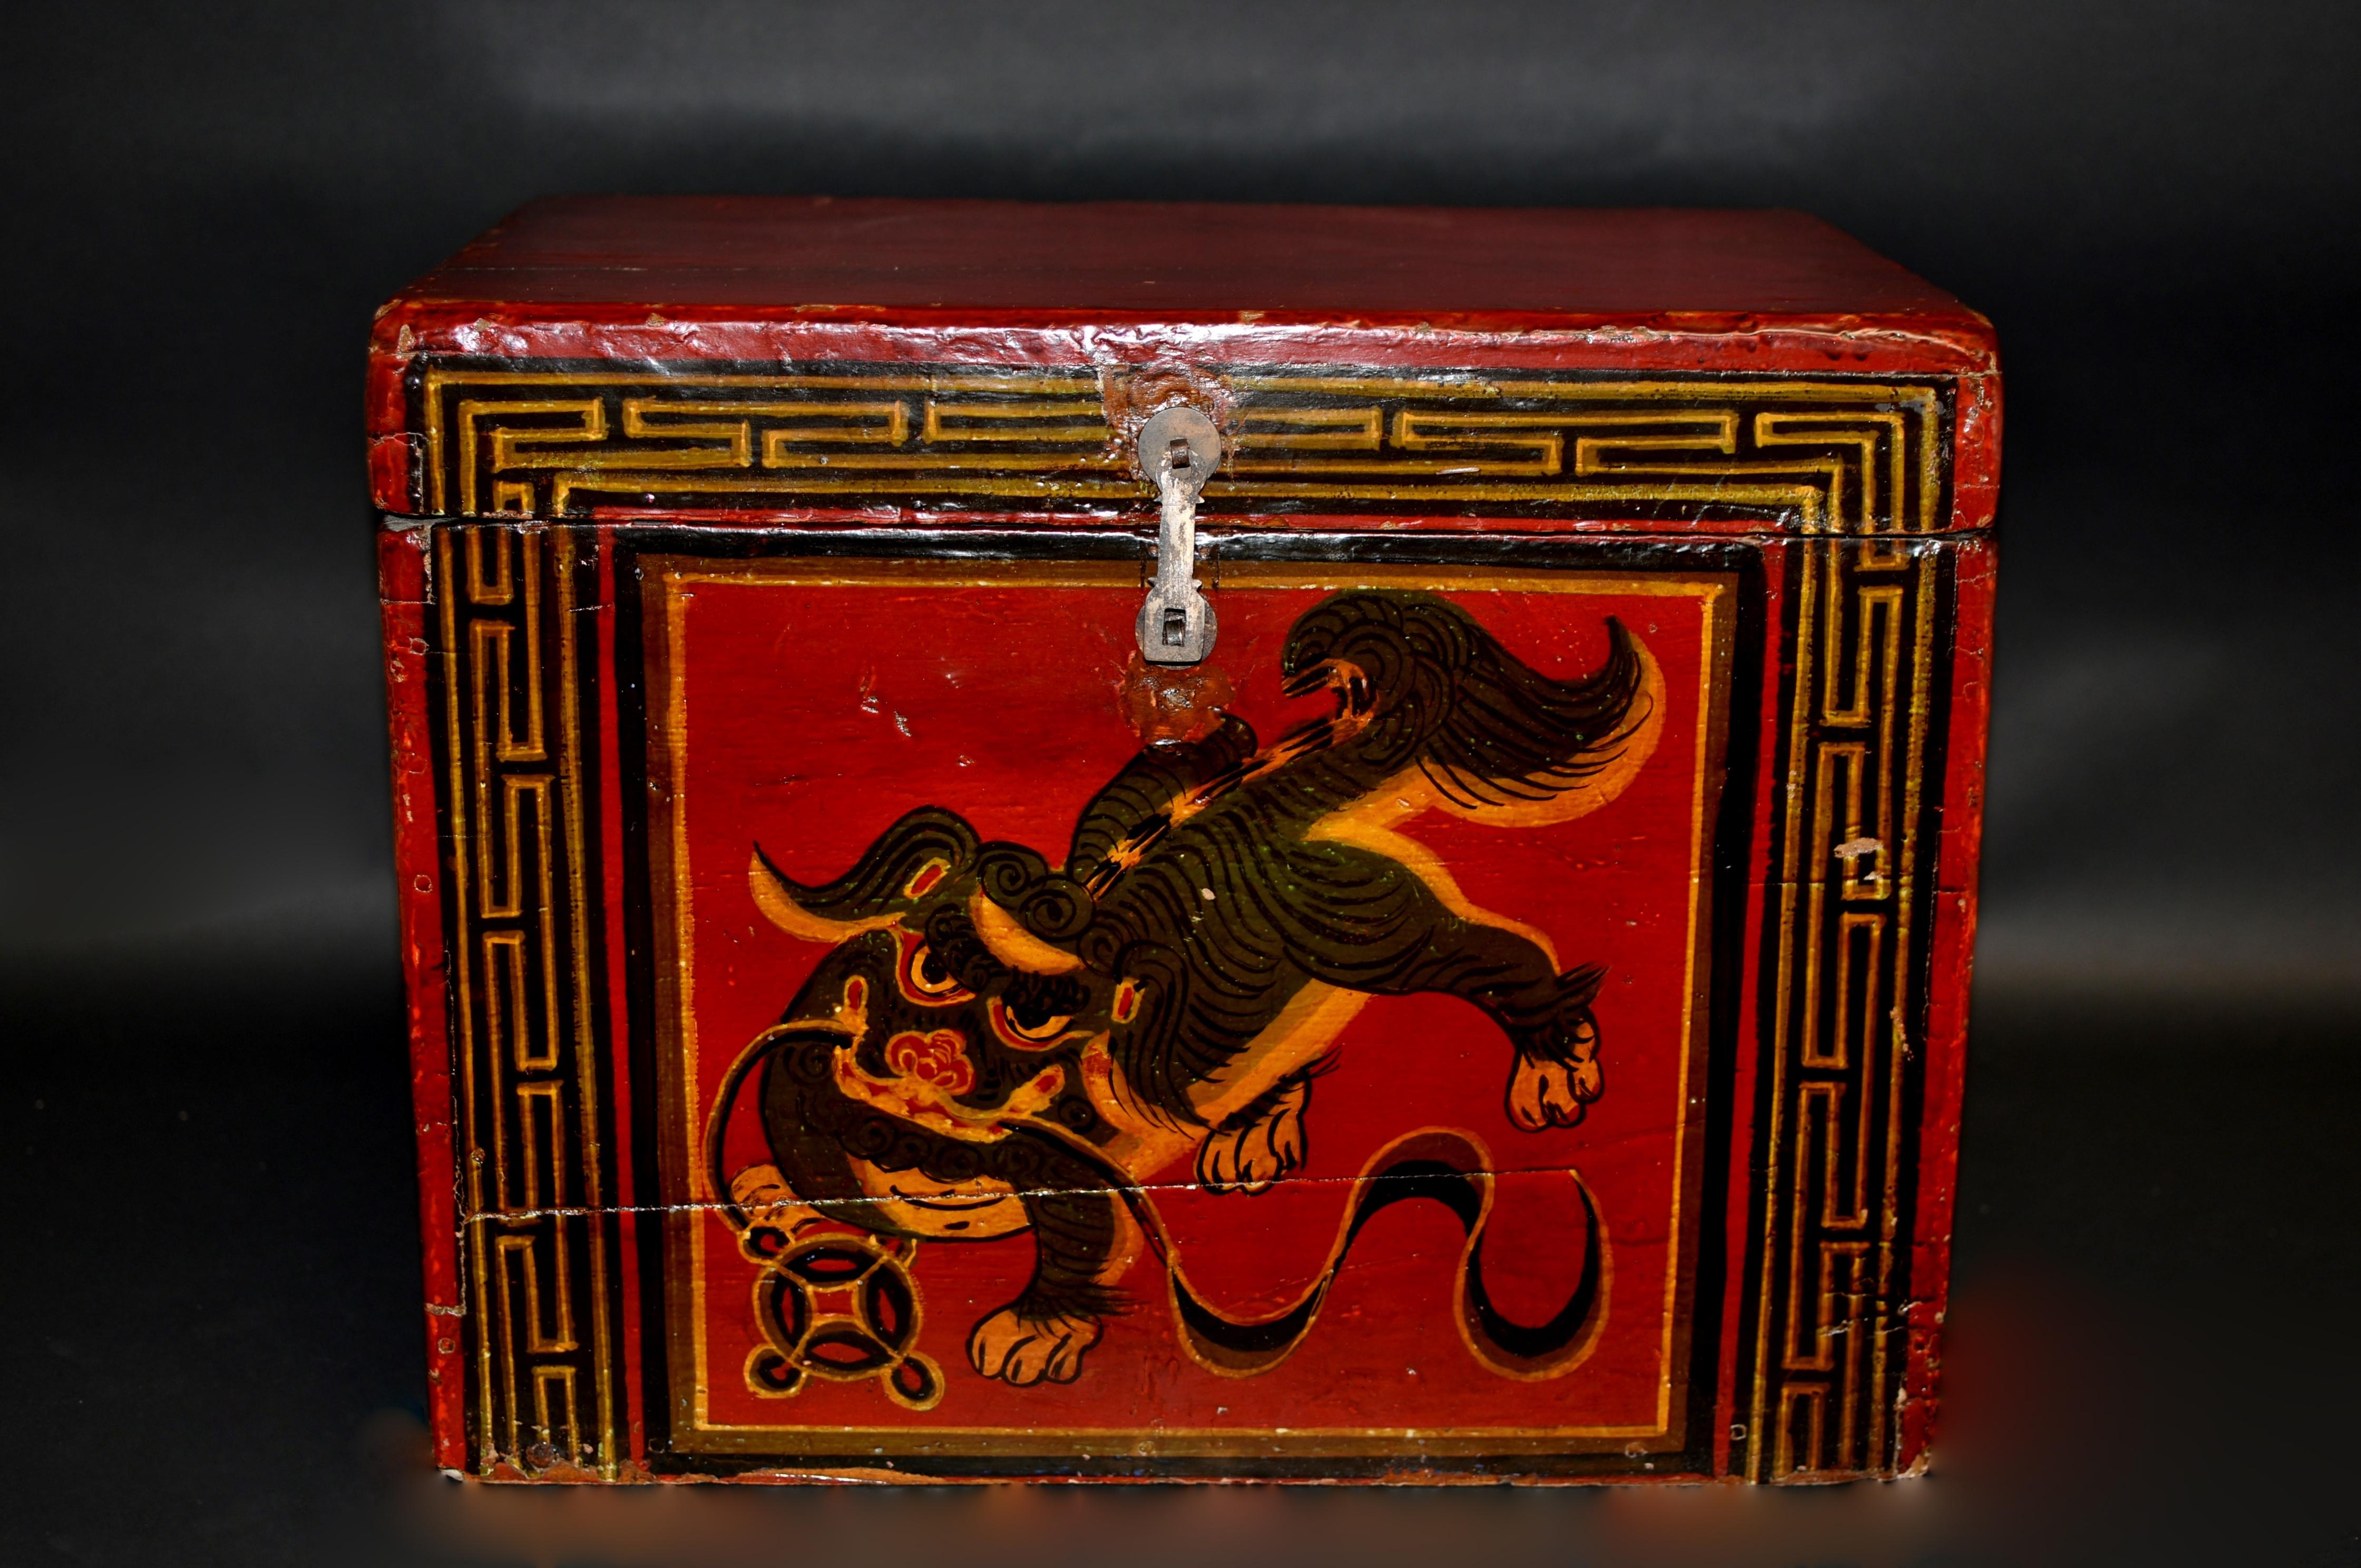 One of the last 2 pieces in our spectacular antique foo dog box collection. This extra large box features a foo dog with big eyes, red lips and wavy mane. Fleshy paws pressing into the ground, big wide mouth holds a ribbon tied onto which an